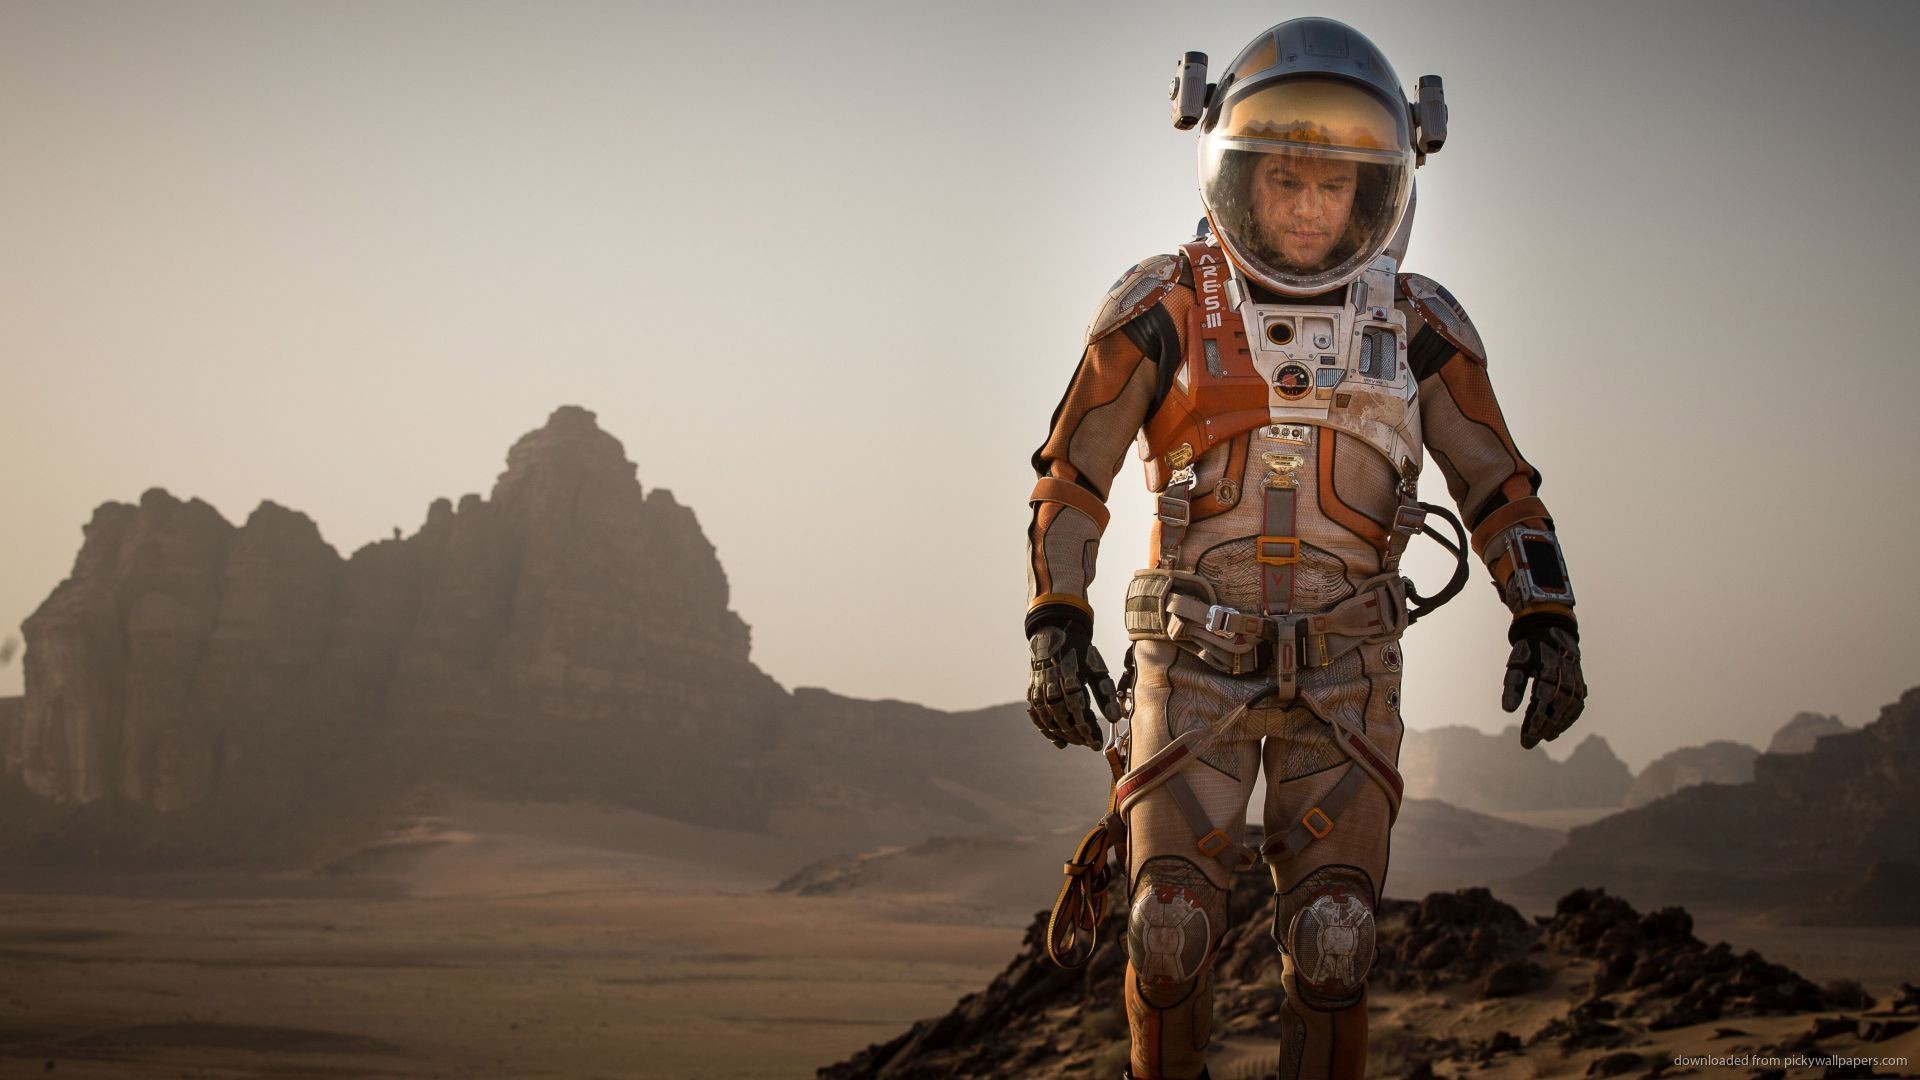 1920x1080 2015 The Martian Movie Wallpaper for 